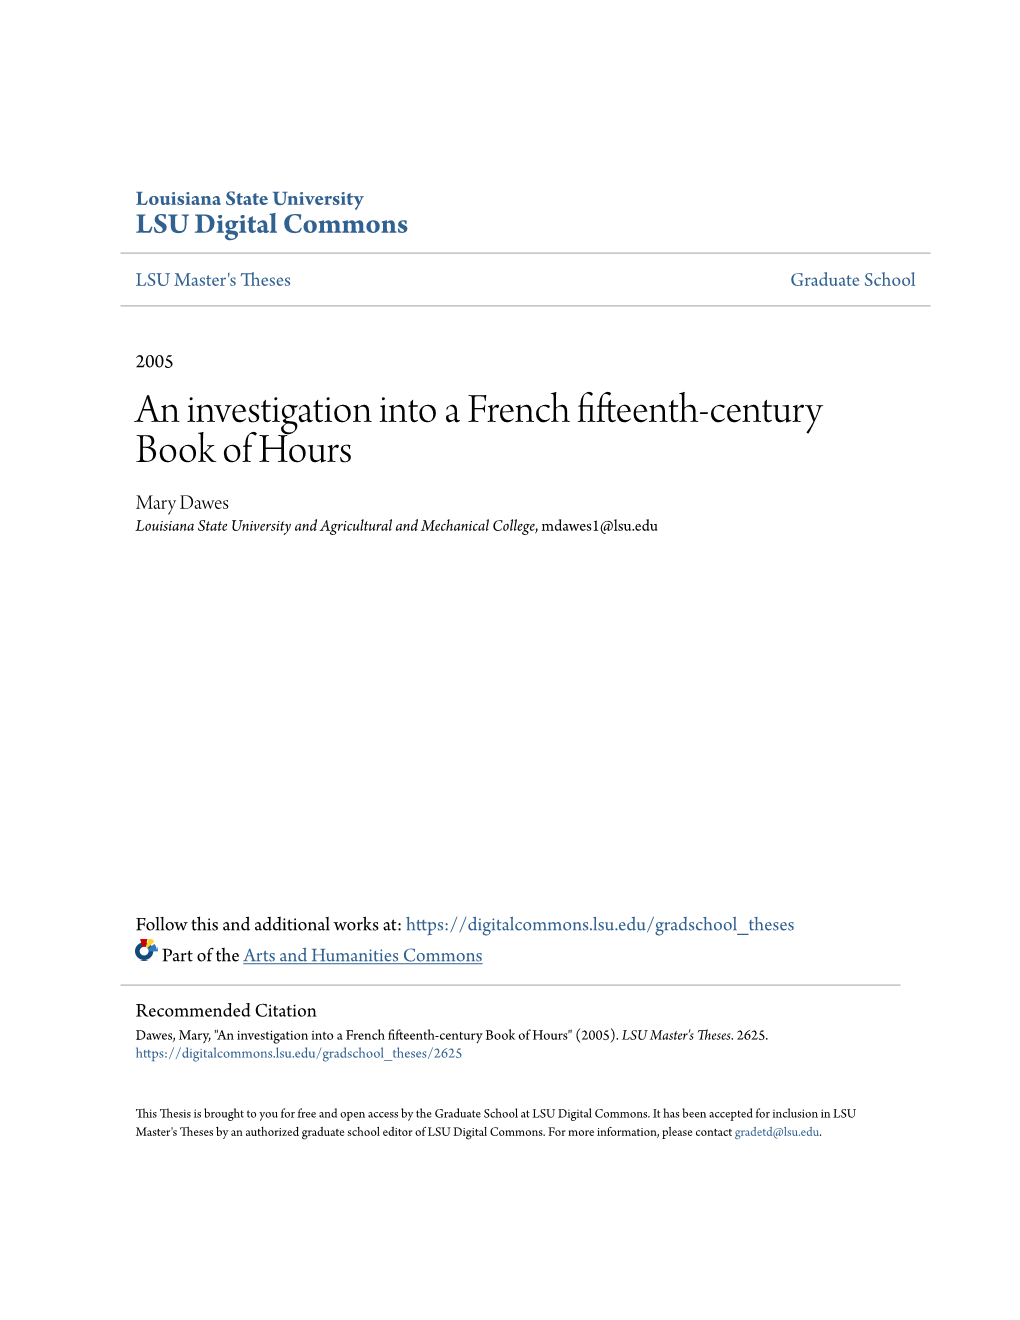 An Investigation Into a French Fifteenth-Century Book of Hours Mary Dawes Louisiana State University and Agricultural and Mechanical College, Mdawes1@Lsu.Edu